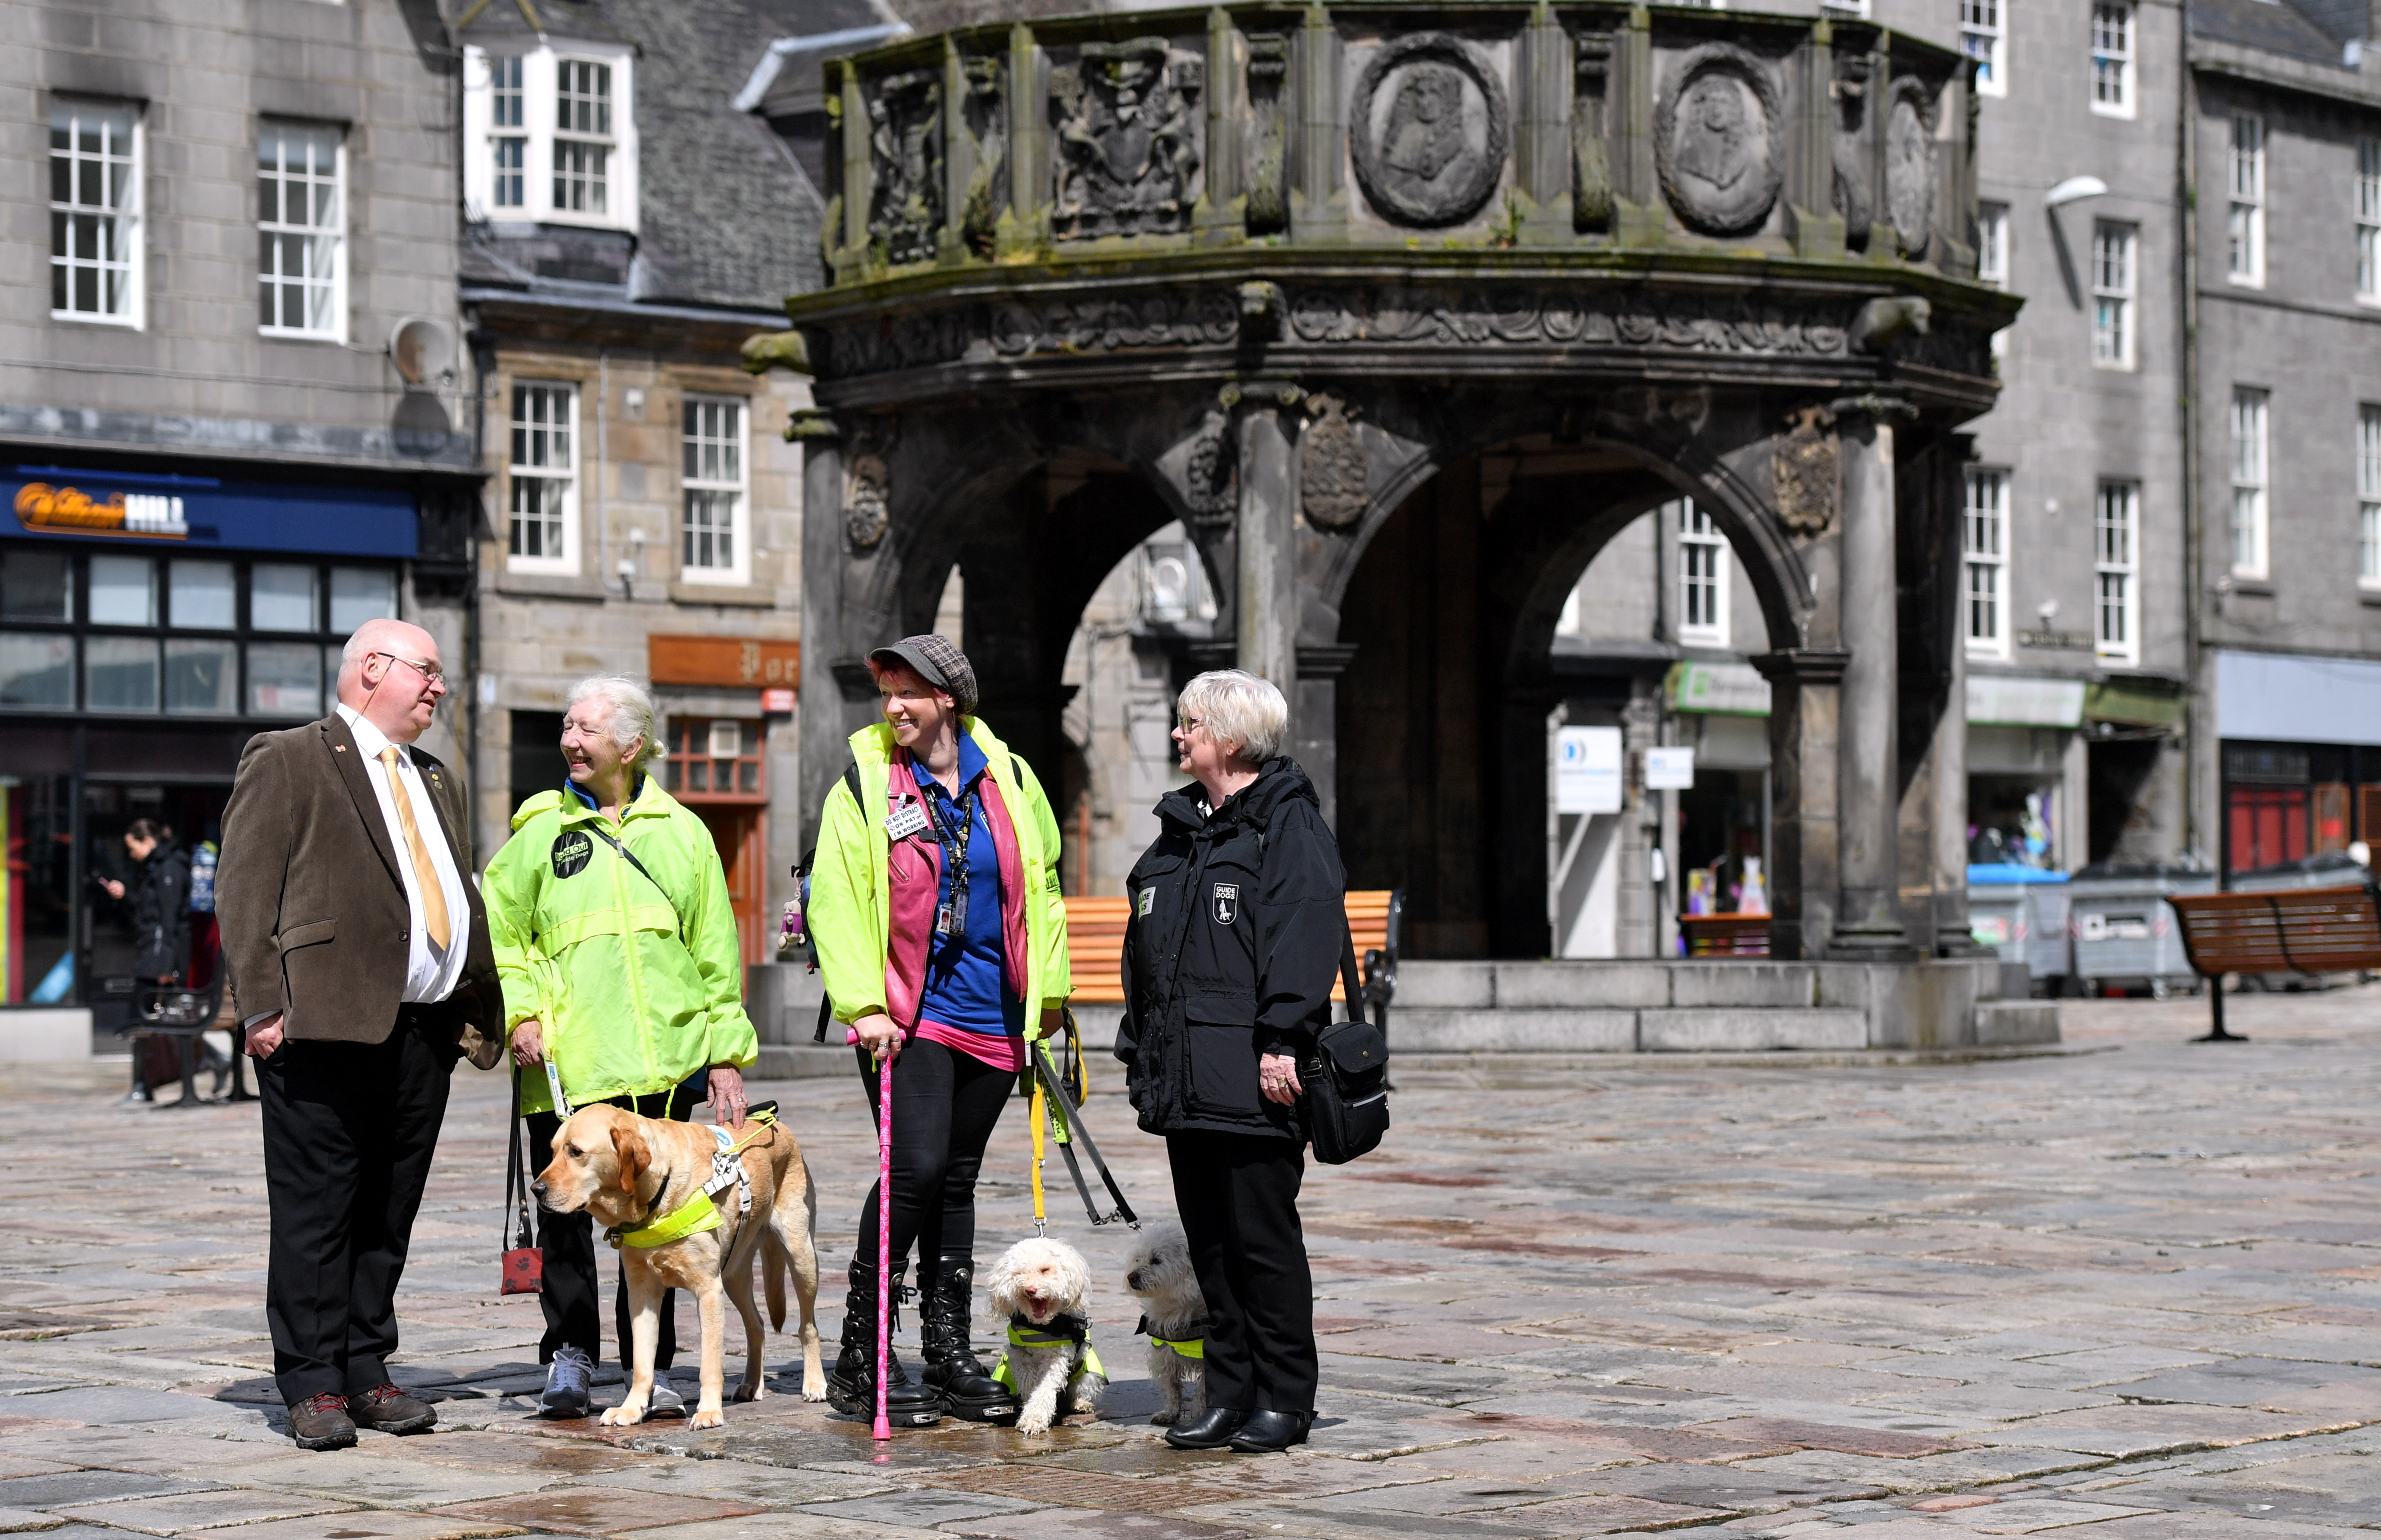 Dell Henrickson, Mary Rasmusen with her guide dog Vince, Ells McHaffie with her assistance dogs Alfie and Blossom, and Pamela Munro of Guide Dogs